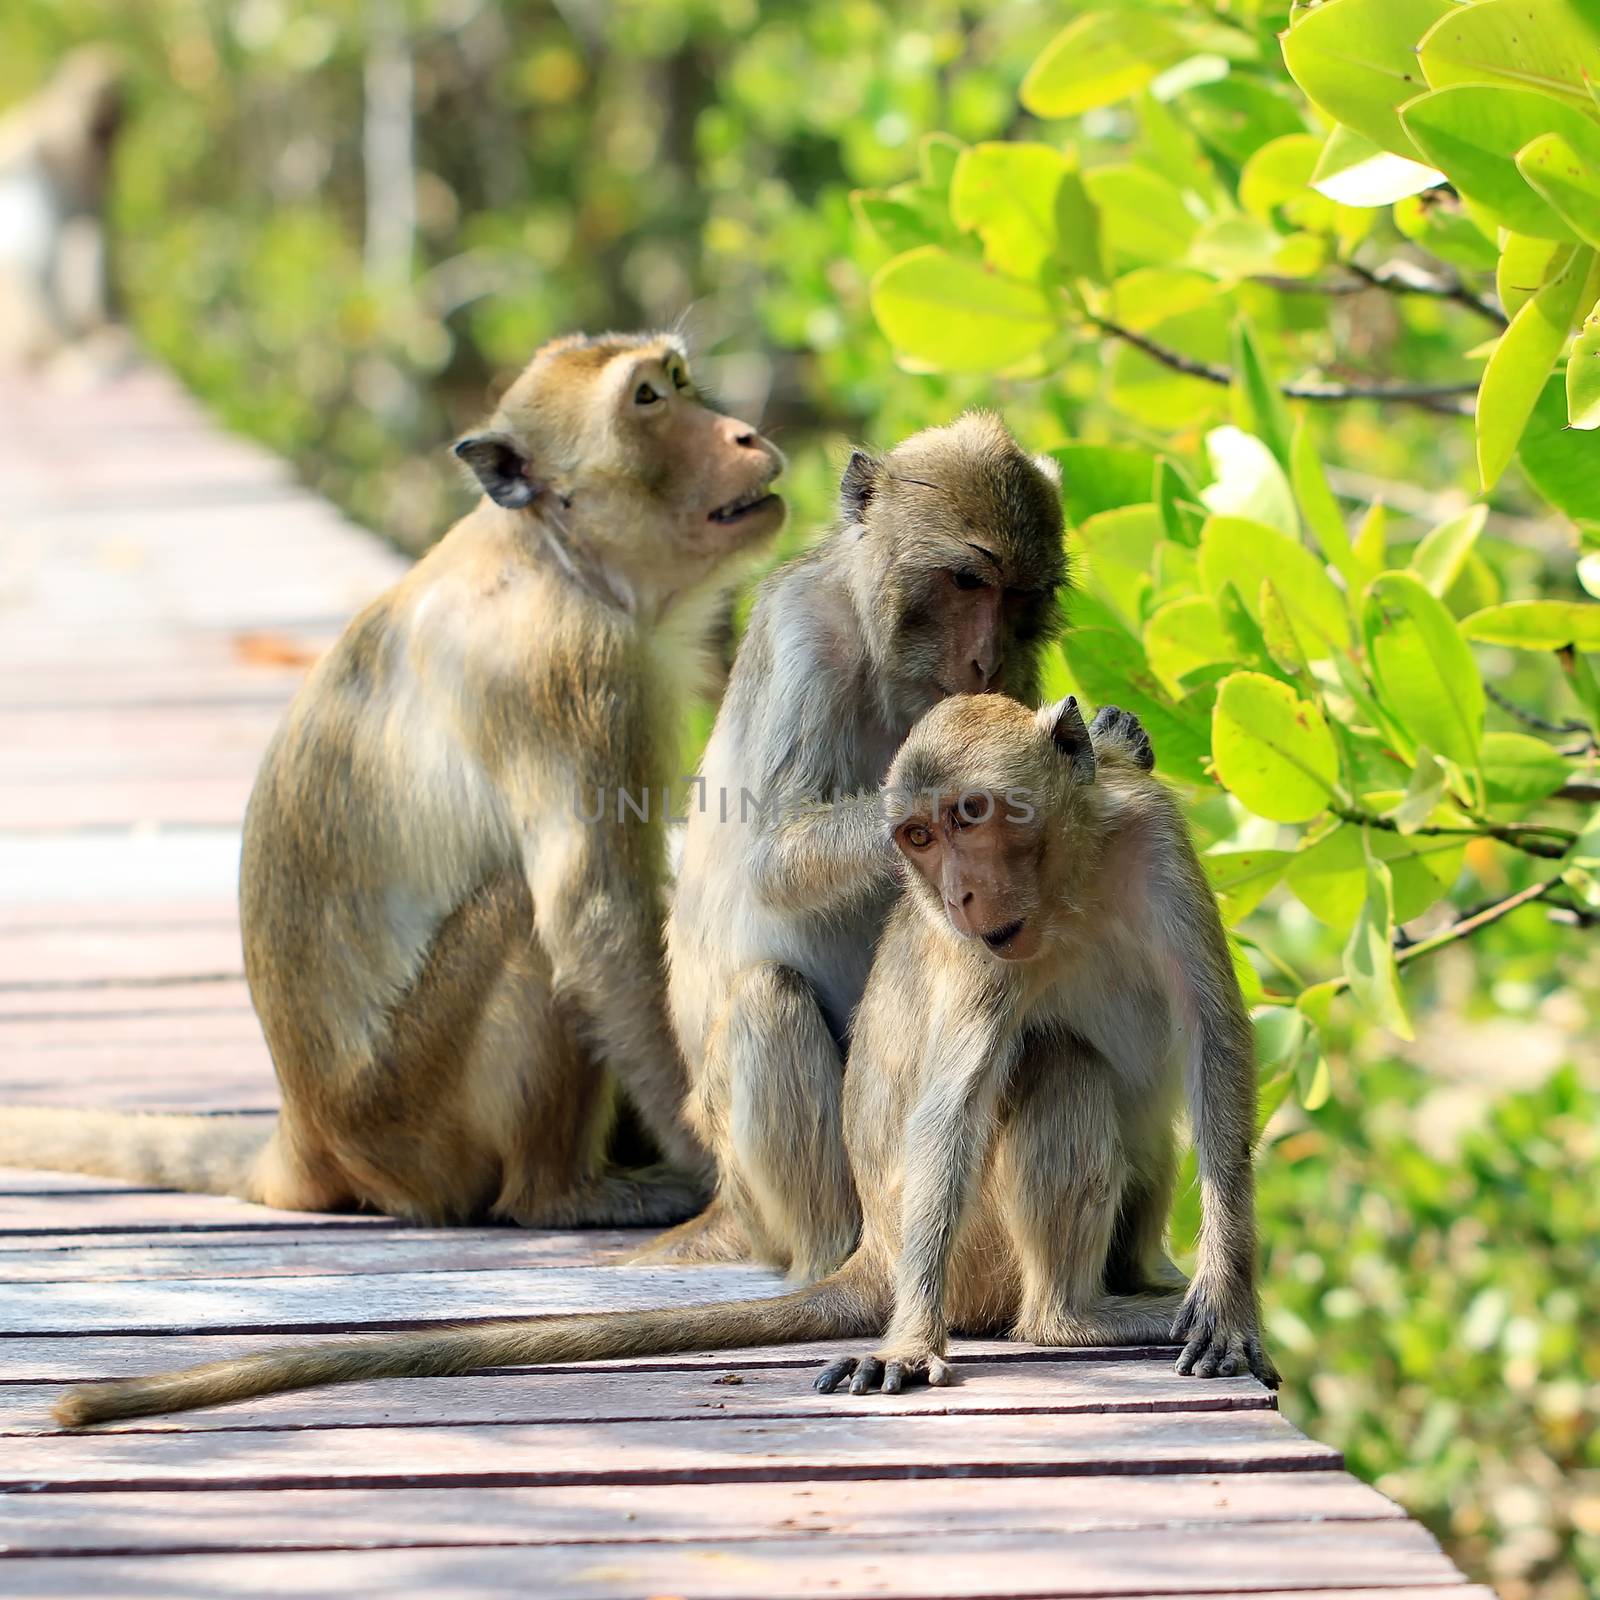 monkey family in nature by leisuretime70